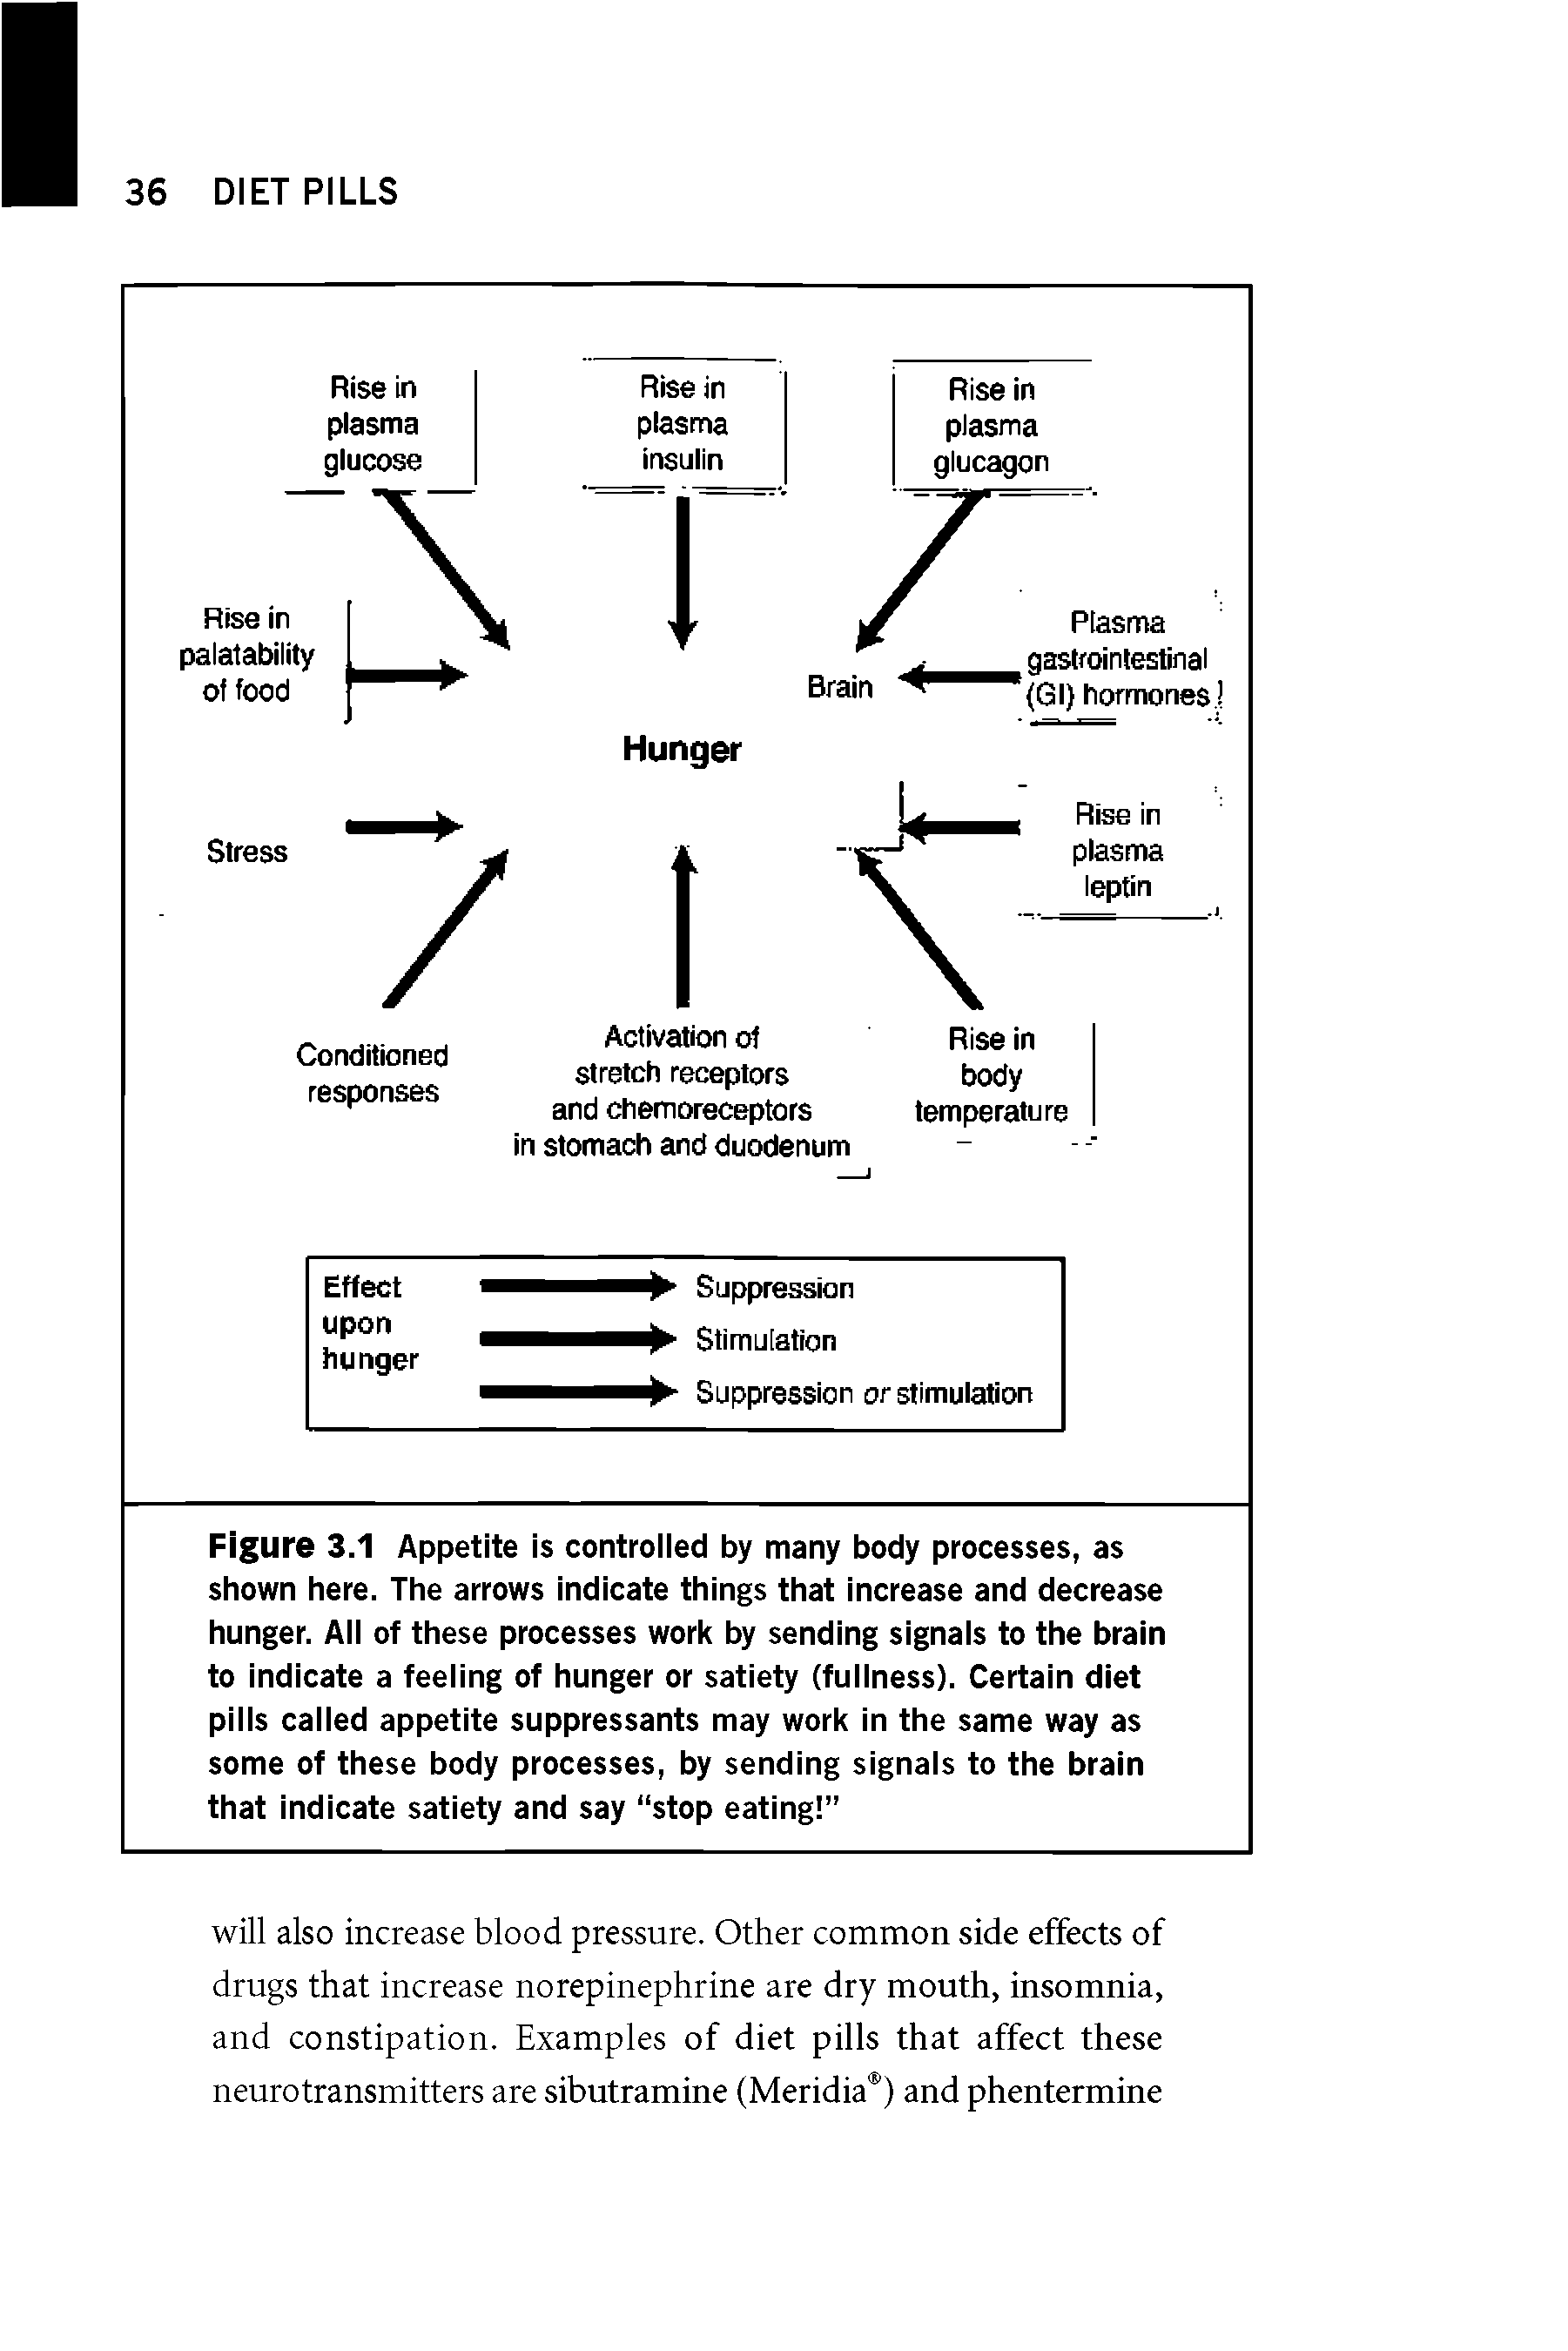 Figure 3.1 Appetite is controlled by many body processes, as shown here. The arrows indicate things that increase and decrease hunger. All of these processes work by sending signals to the brain to indicate a feeling of hunger or satiety (fullness). Certain diet pills called appetite suppressants may work in the same way as some of these body processes, by sending signals to the brain that indicate satiety and say stop eating ...